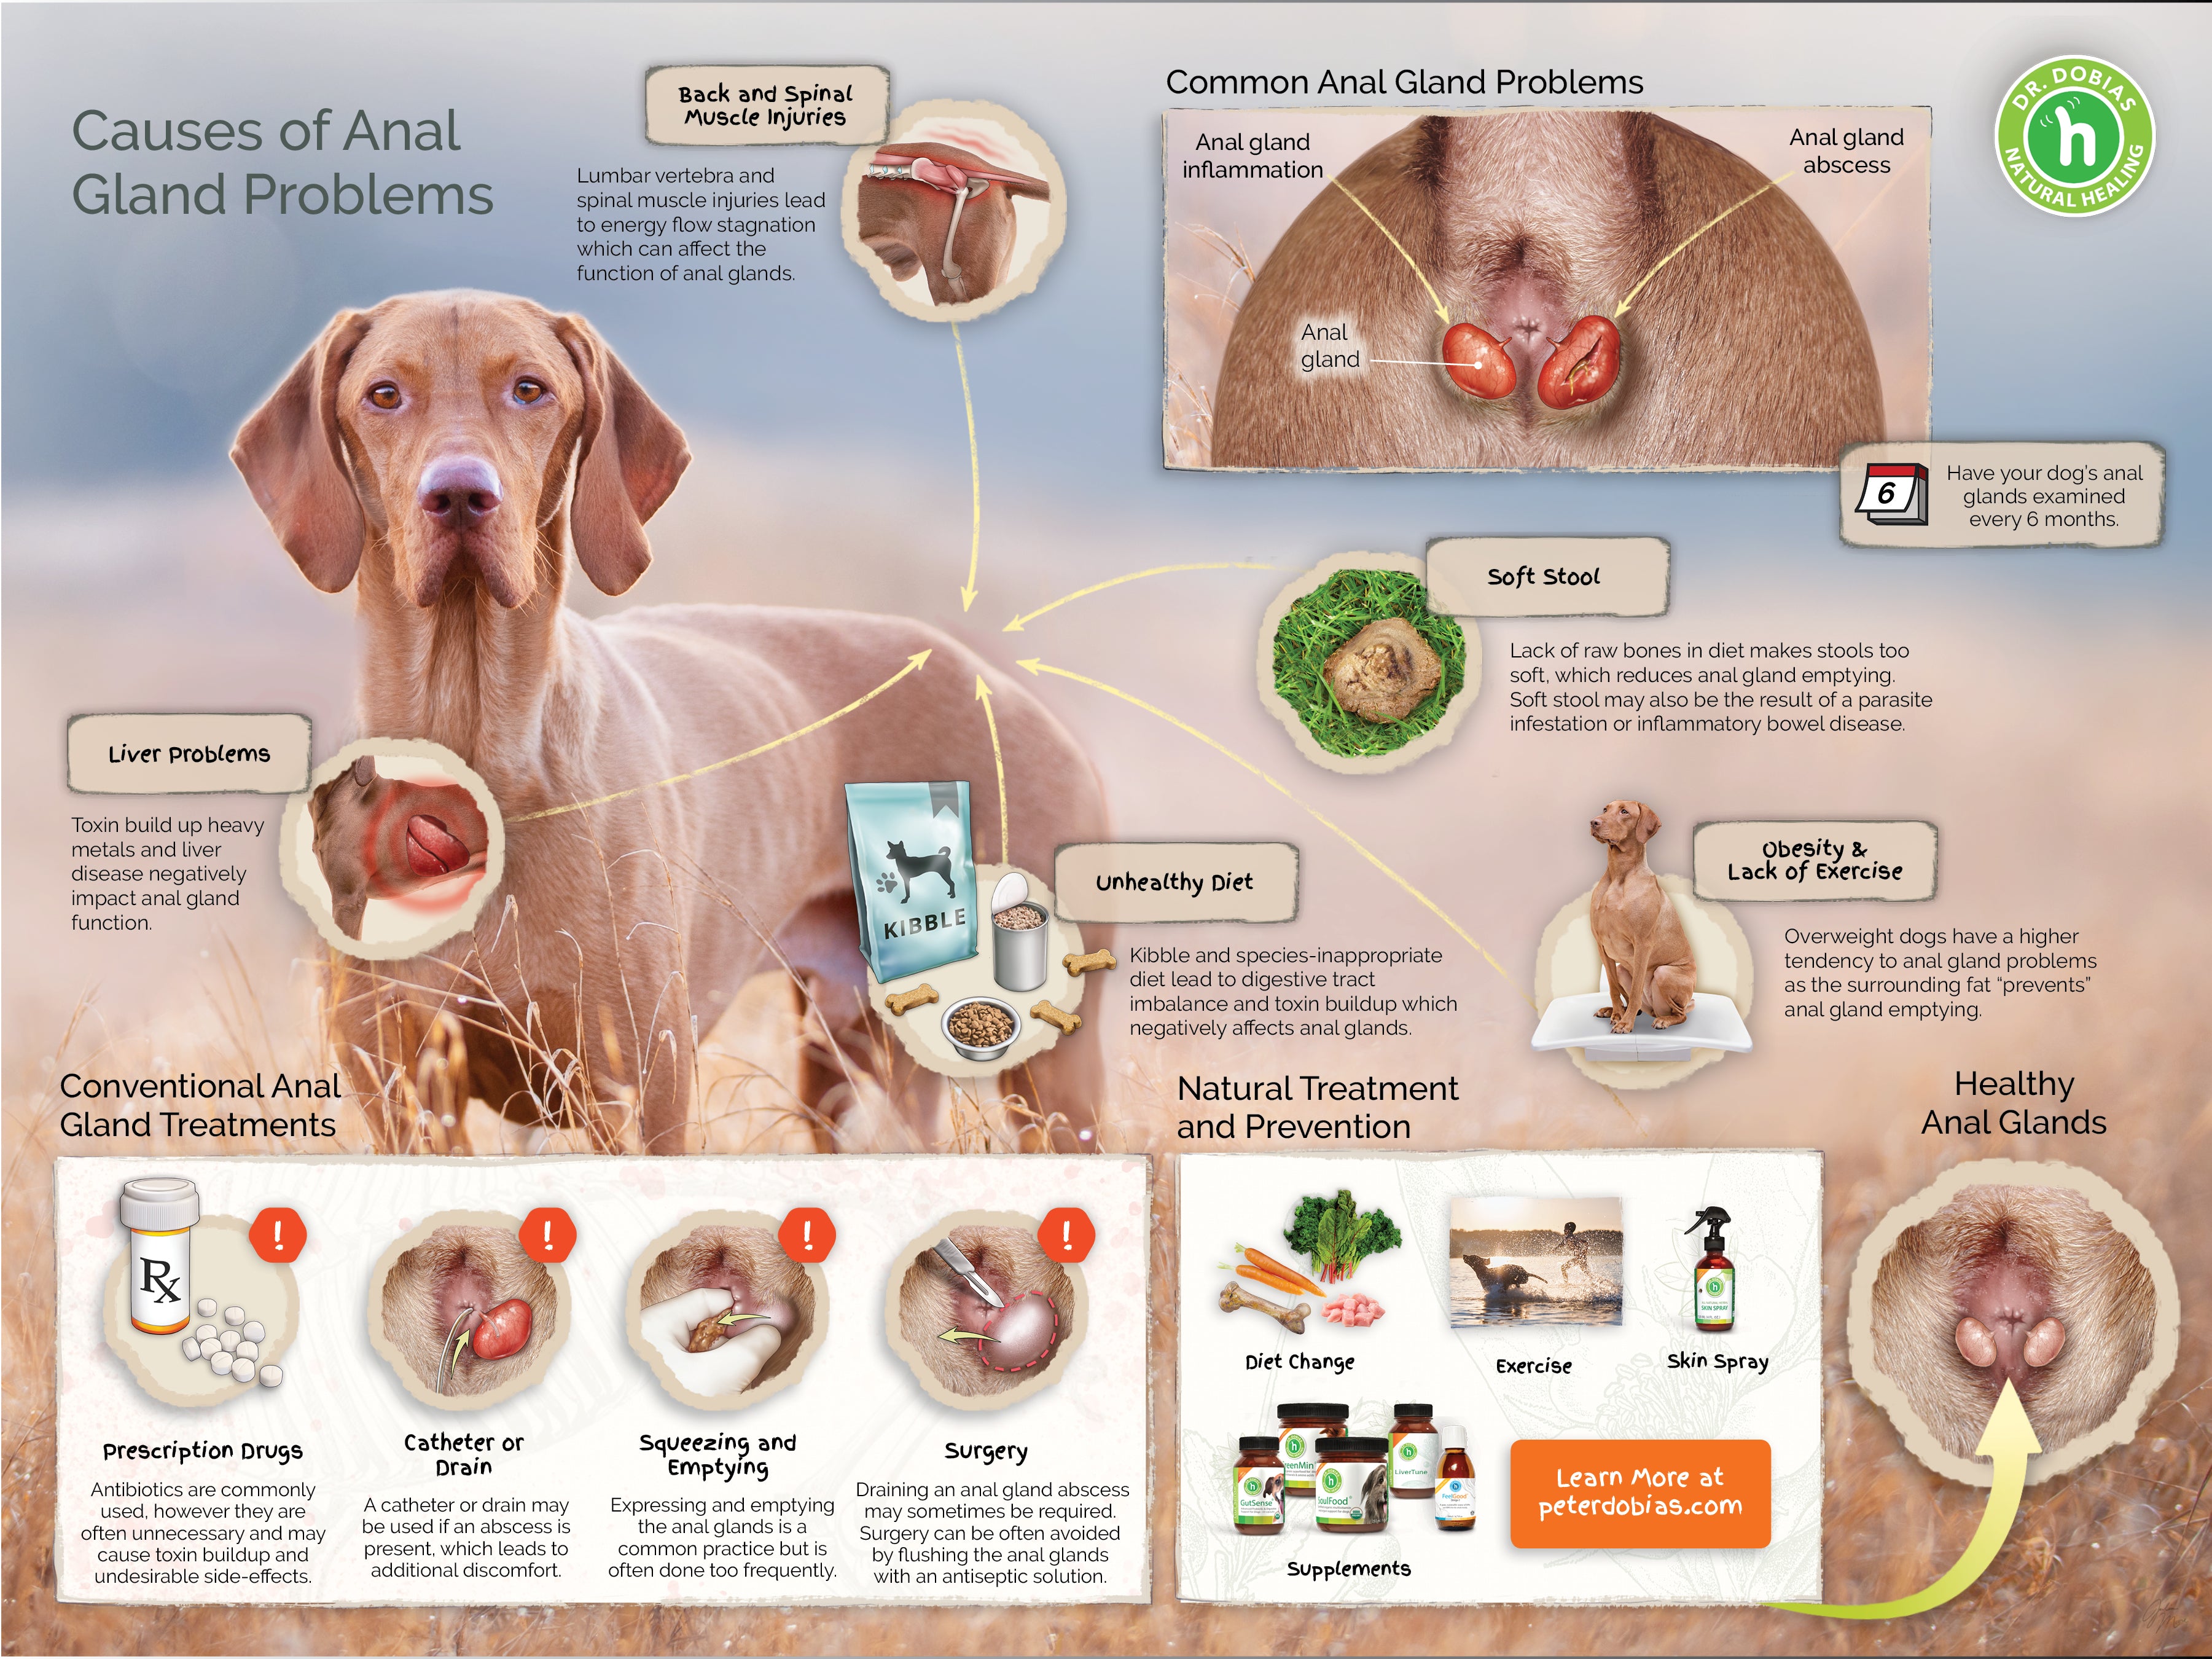 Where Can I Get My Dogs Anal Glands Expressed? Find Out Here!